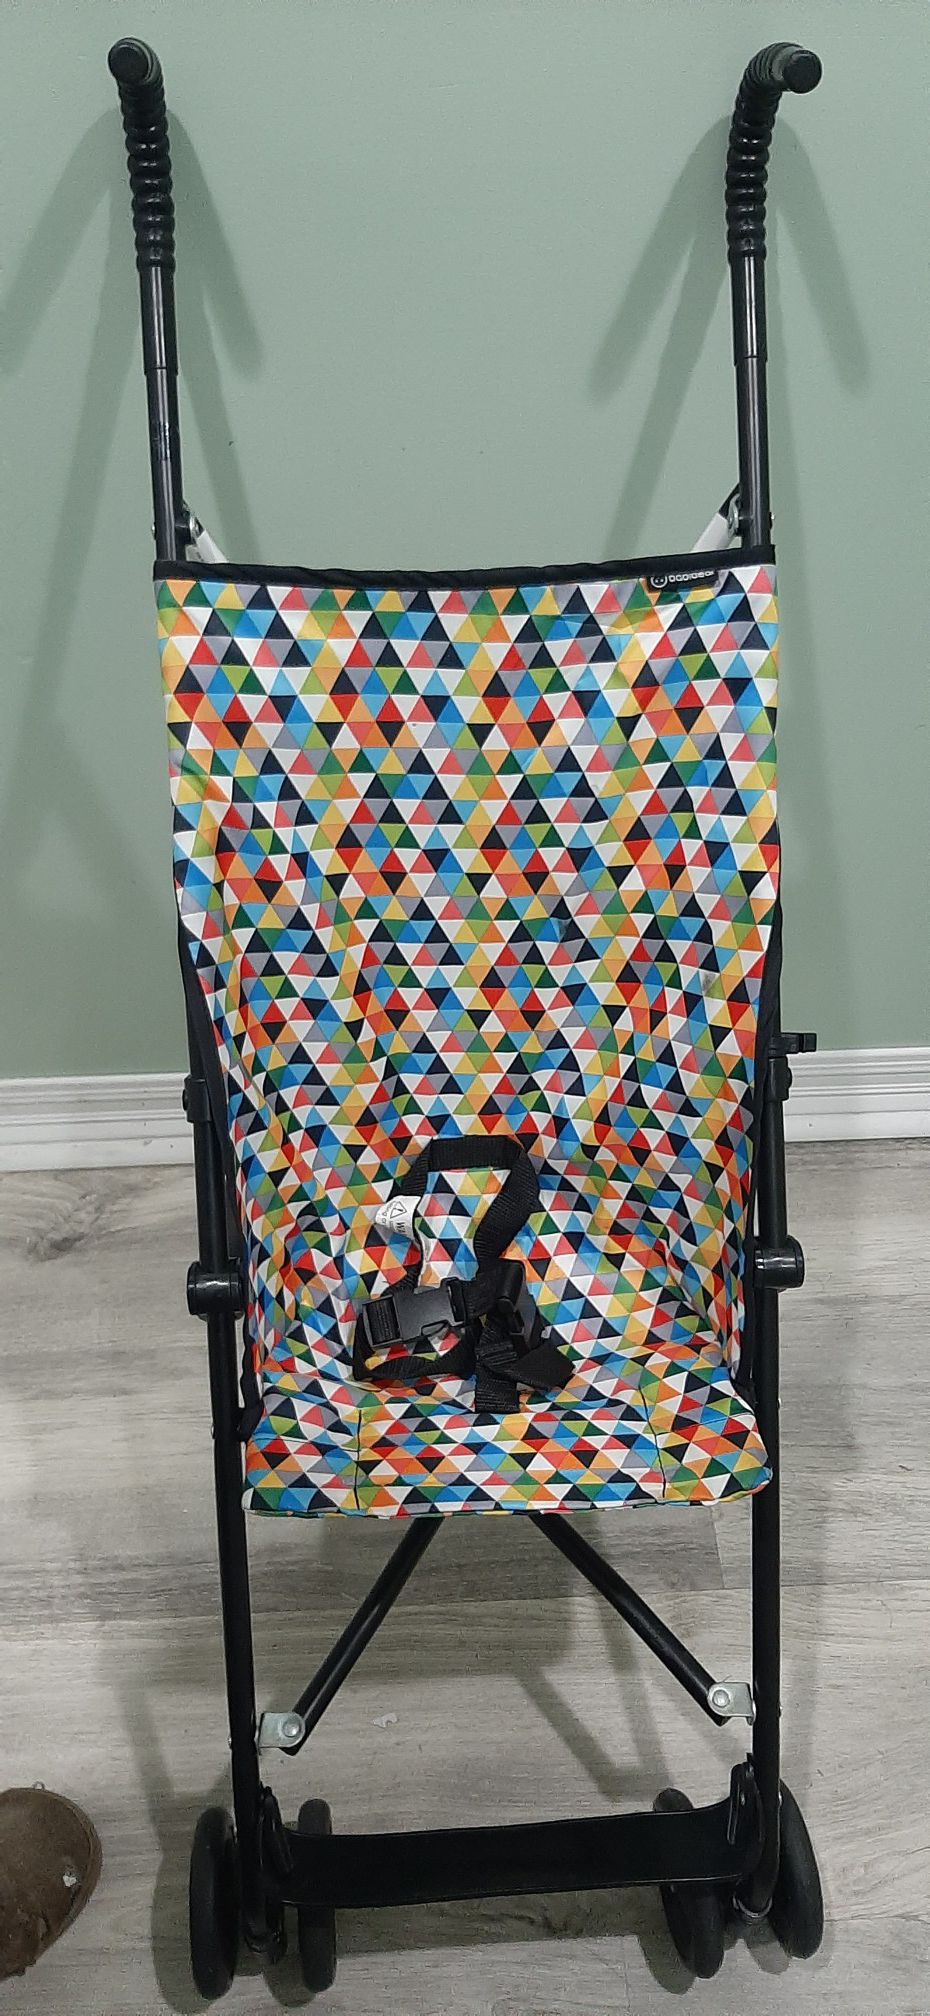 Babideal stroller / Open box but was never used